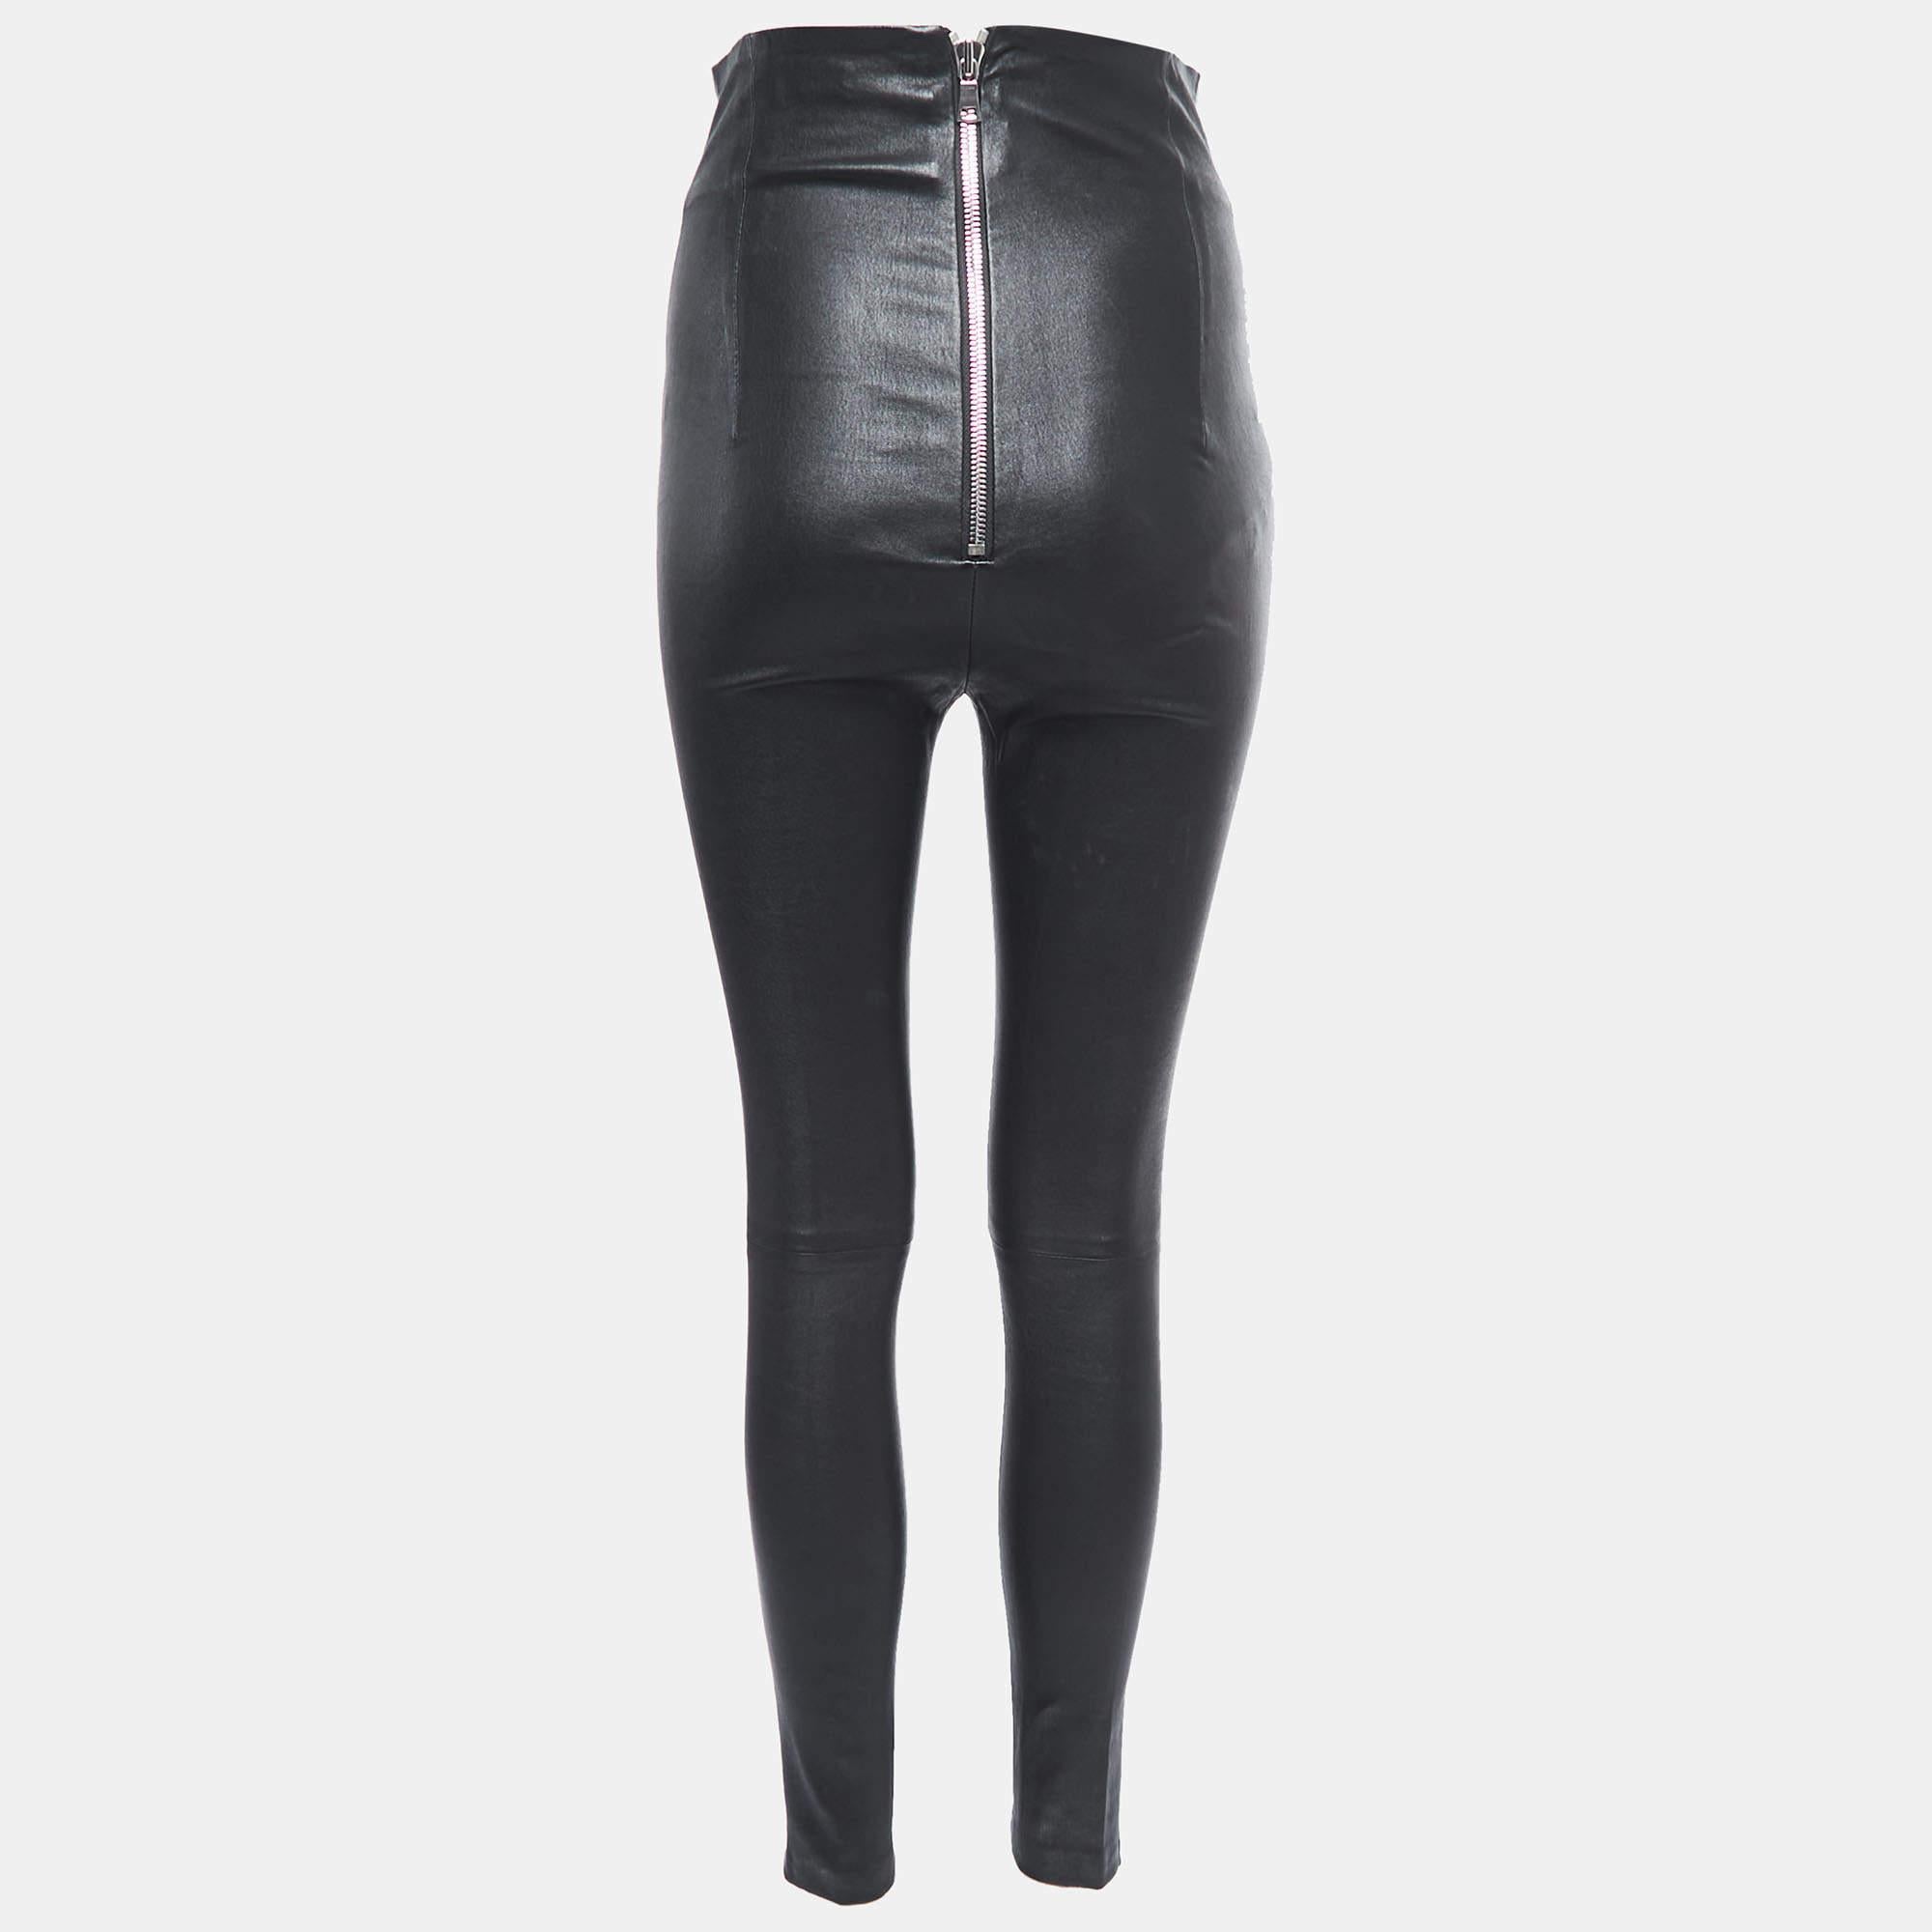 Sablyn's skinny leggings exude timeless allure and modern edge. Crafted from supple black leather, these leggings effortlessly contour to your figure, enhancing your silhouette. The sleek, form-fitting design is complemented by meticulous stitching,